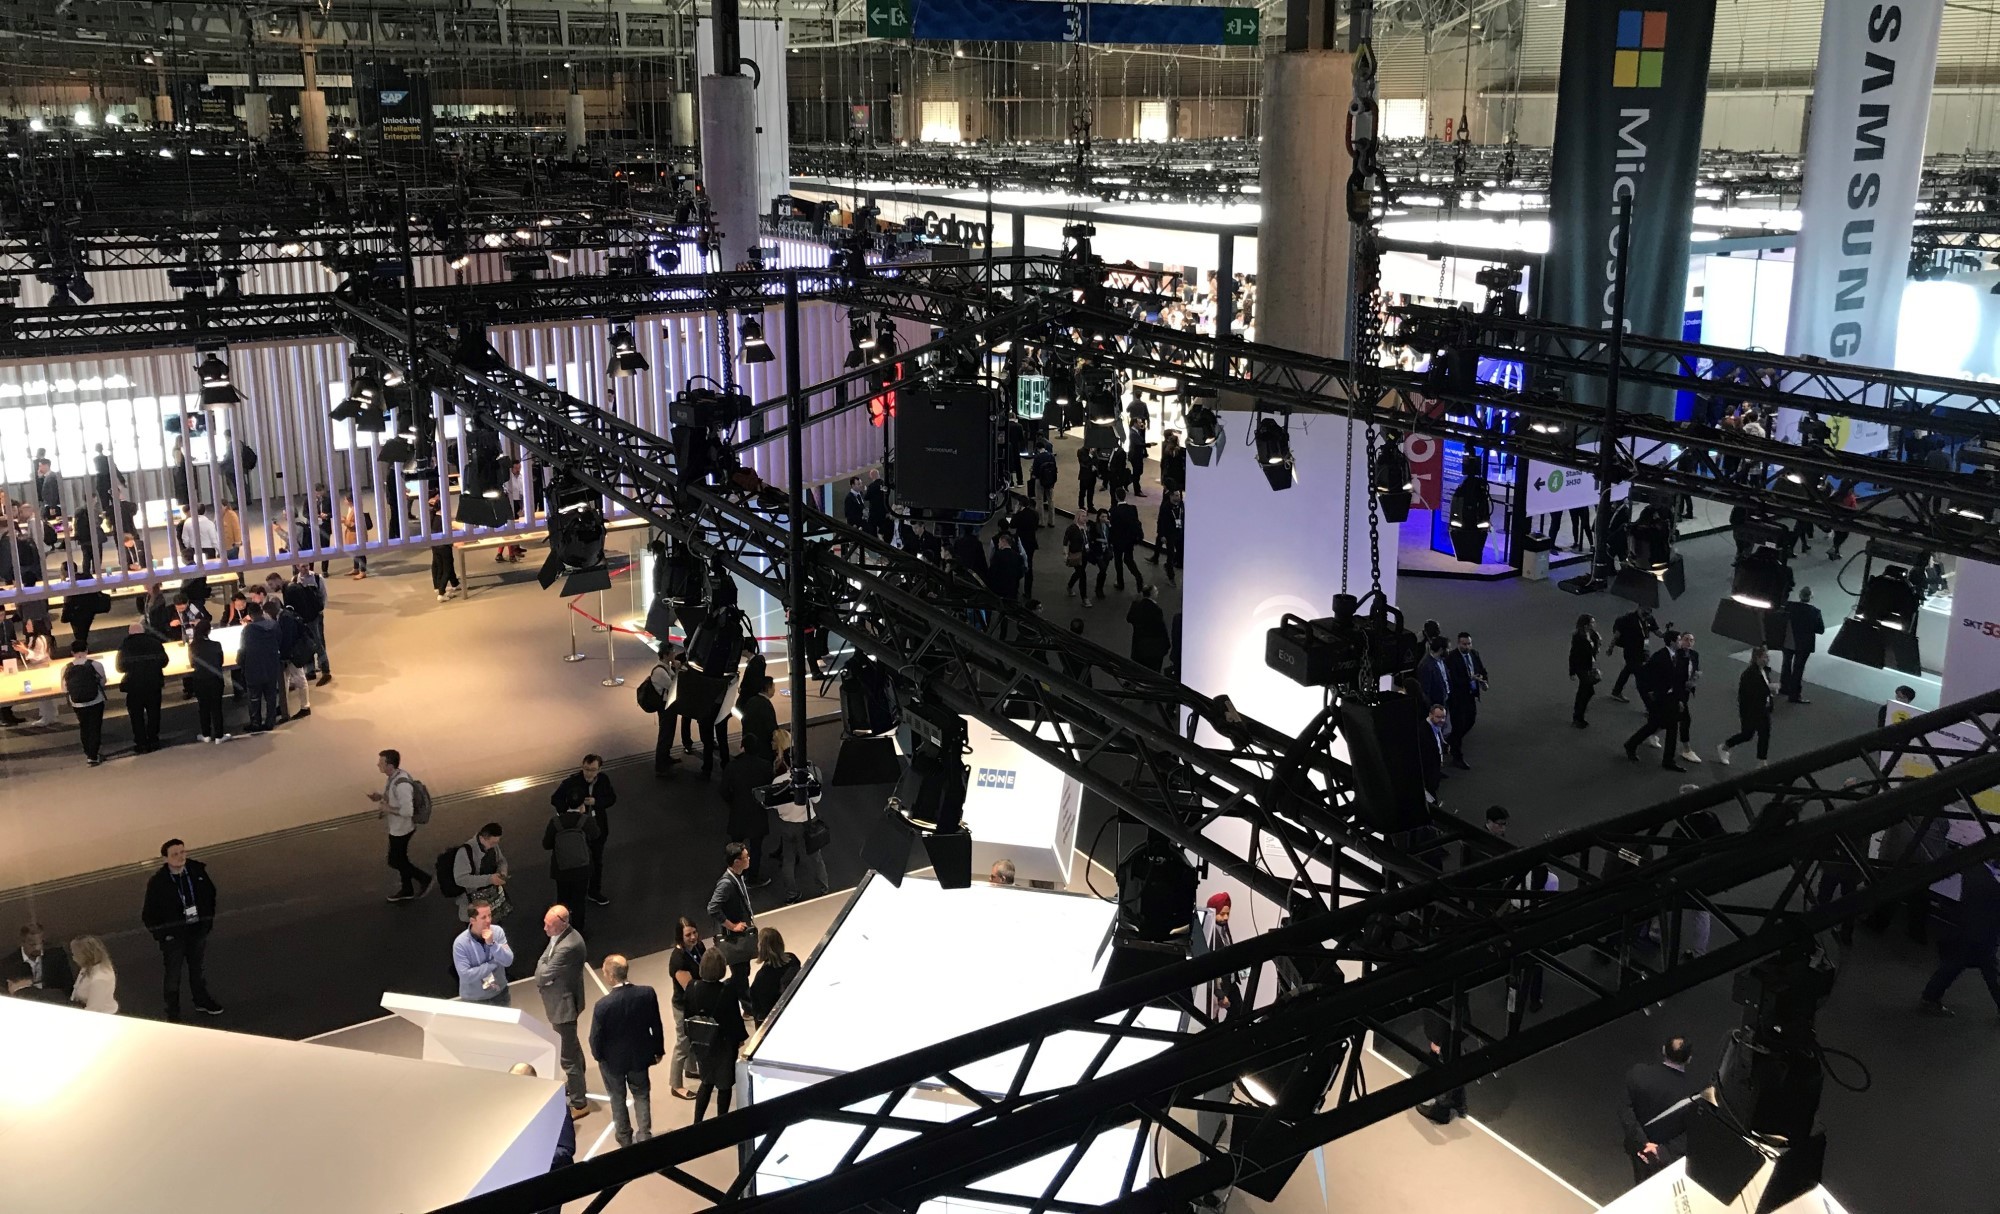 MWC19: App Developers and Marketing Agencies at Mobile World Congress